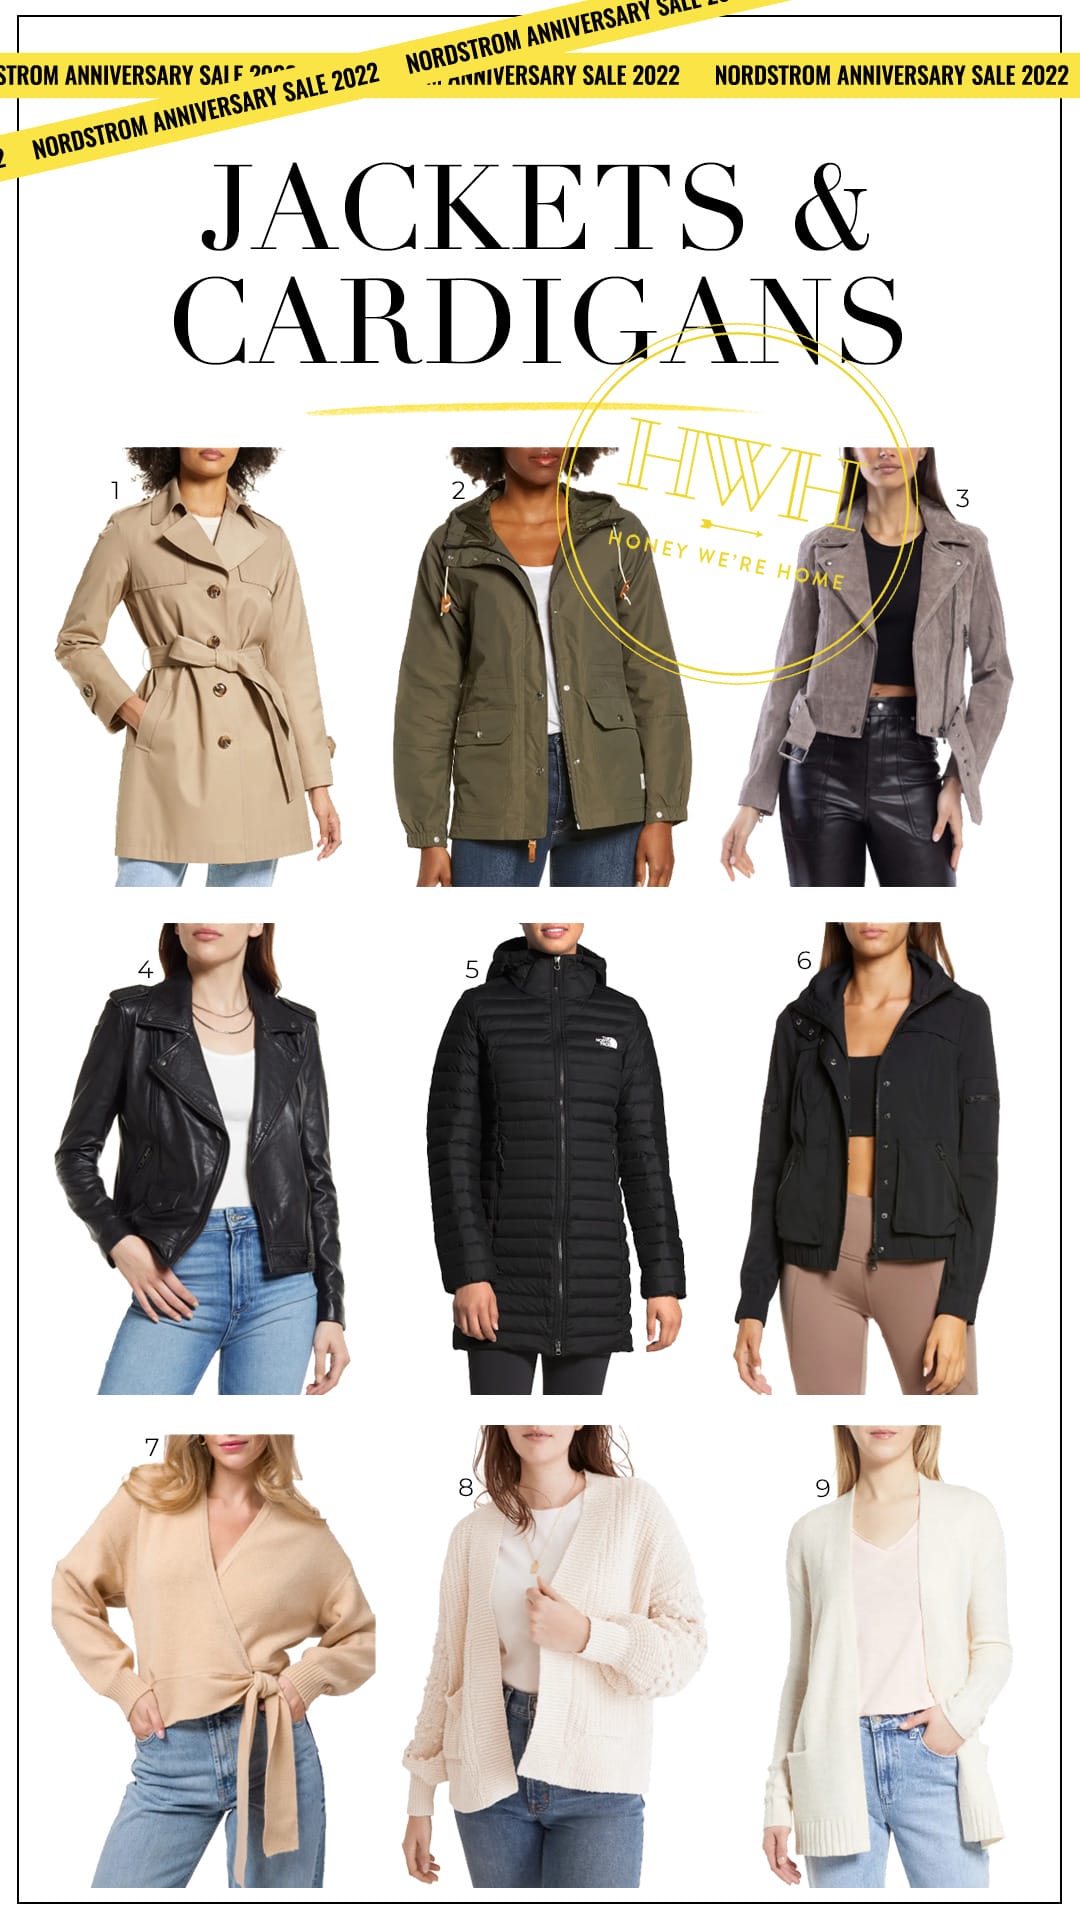 Nordstrom Anniversary Sale 2022 Jackets & Cardigans